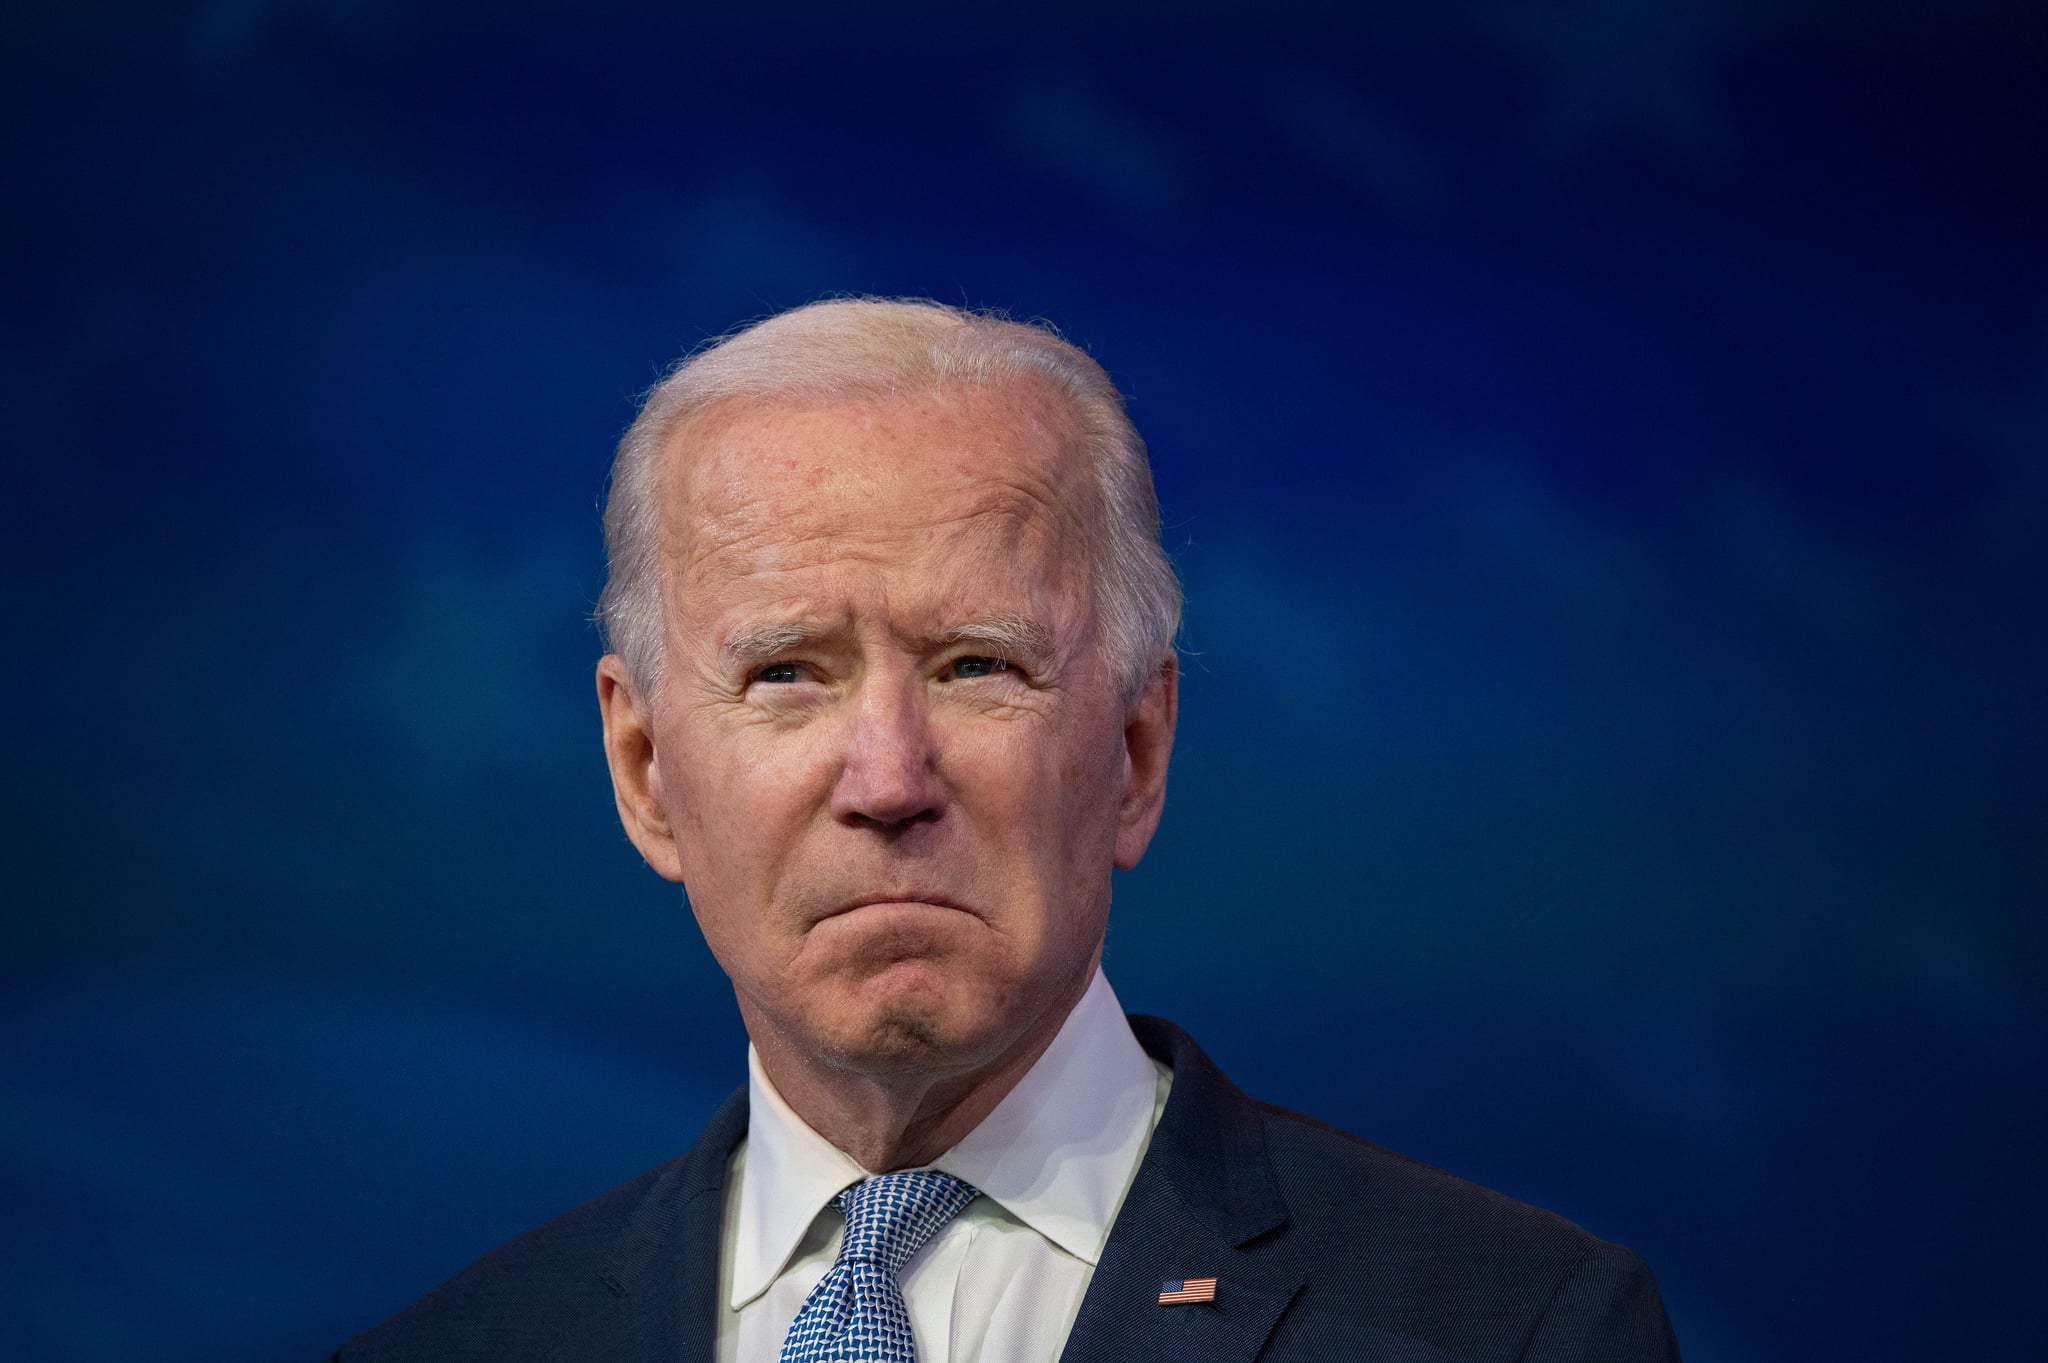 US President-elect Joe Biden speaks at the Queen Theatre on January 6, 2021, in Wilmington, Delaware. - Biden on Wednesday denounced the storming of the US Capitol as an 